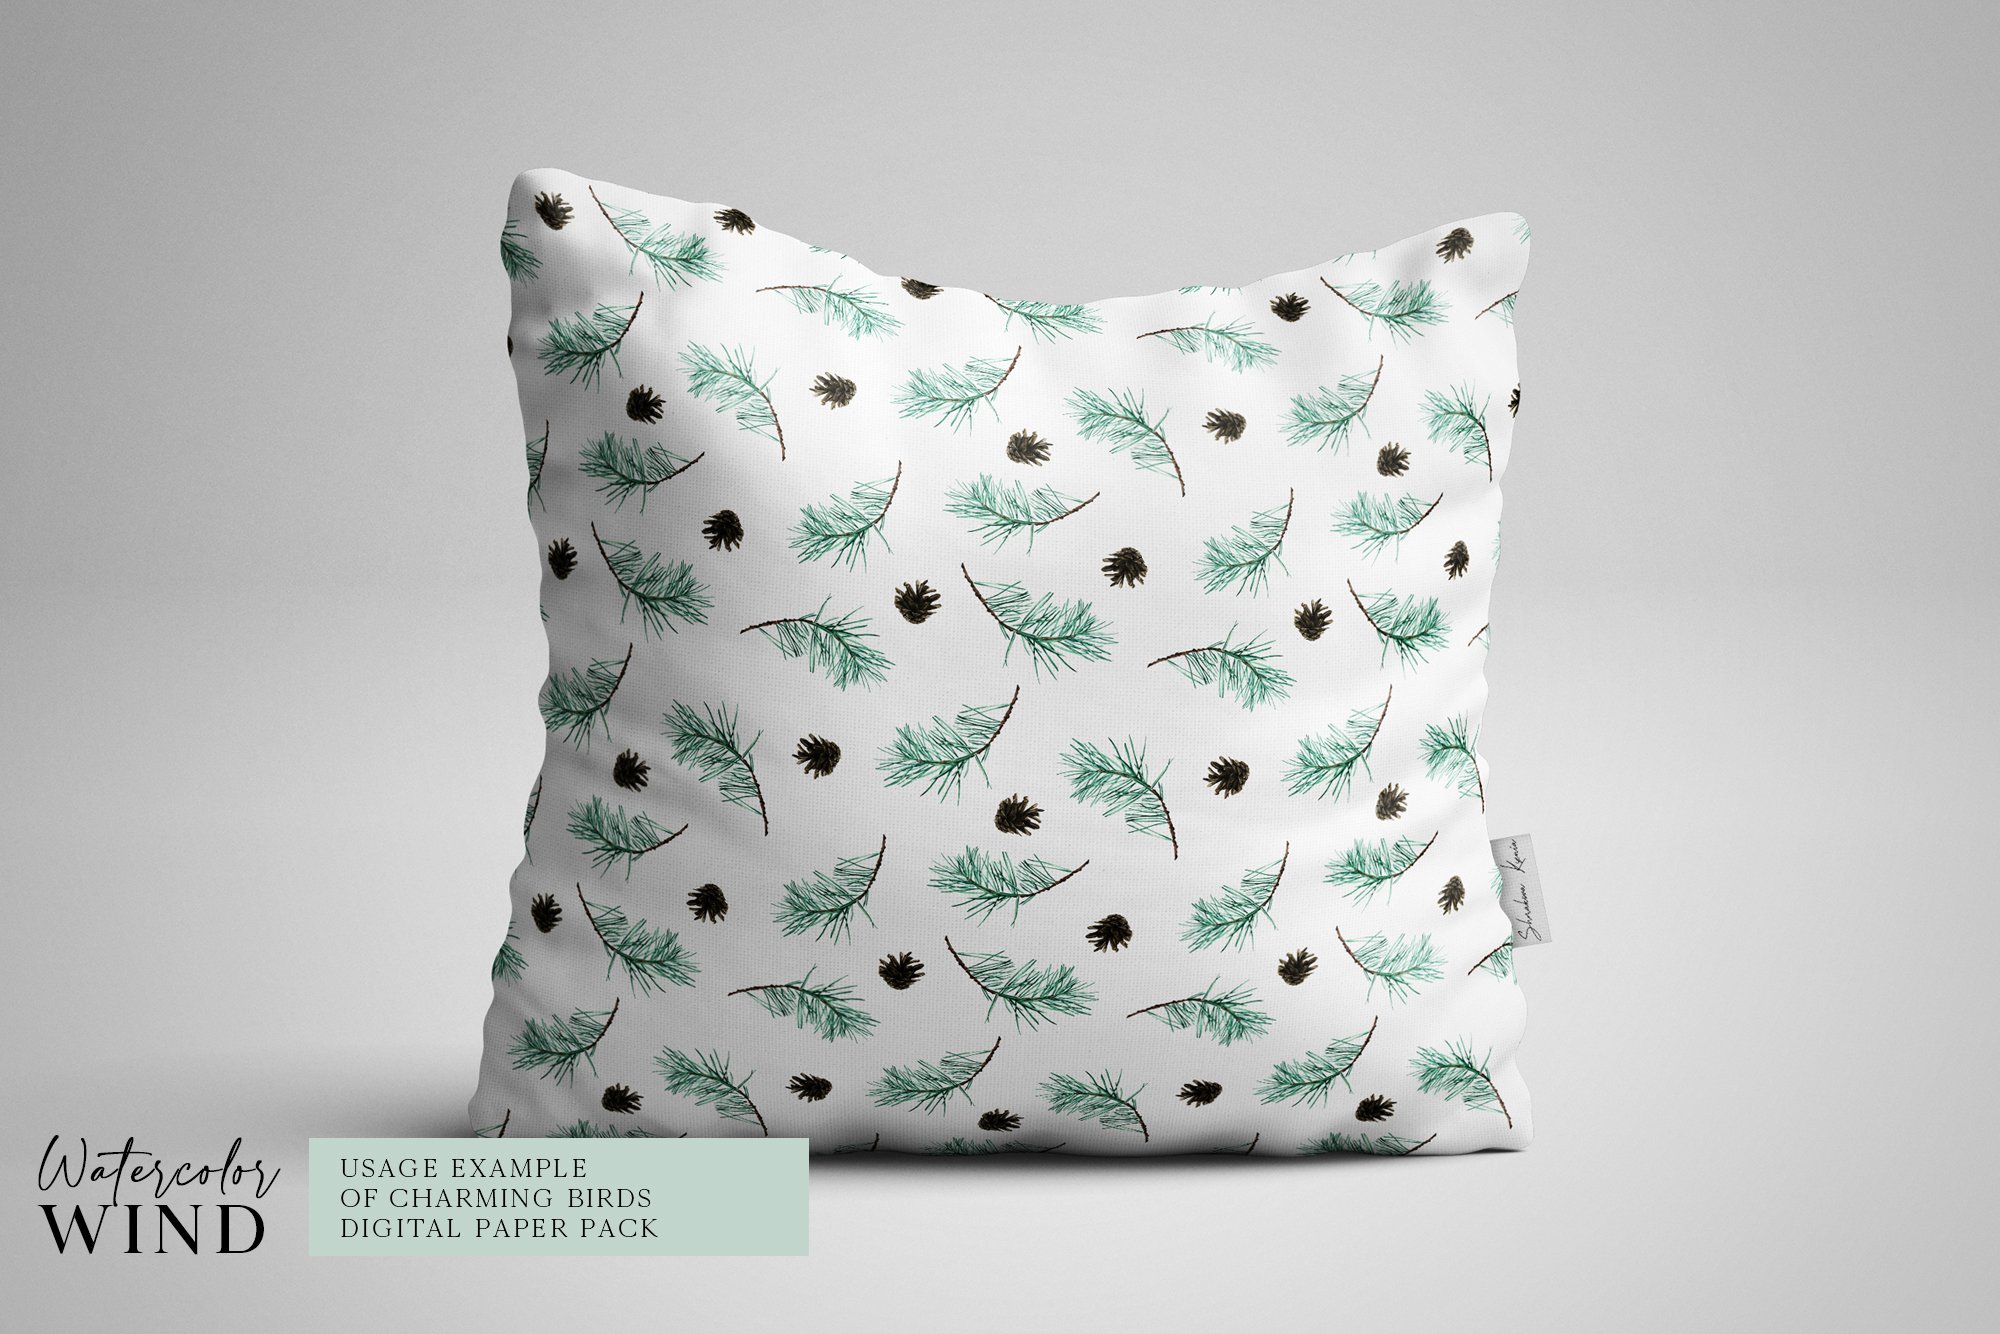 Middle decorate pillow with birds.